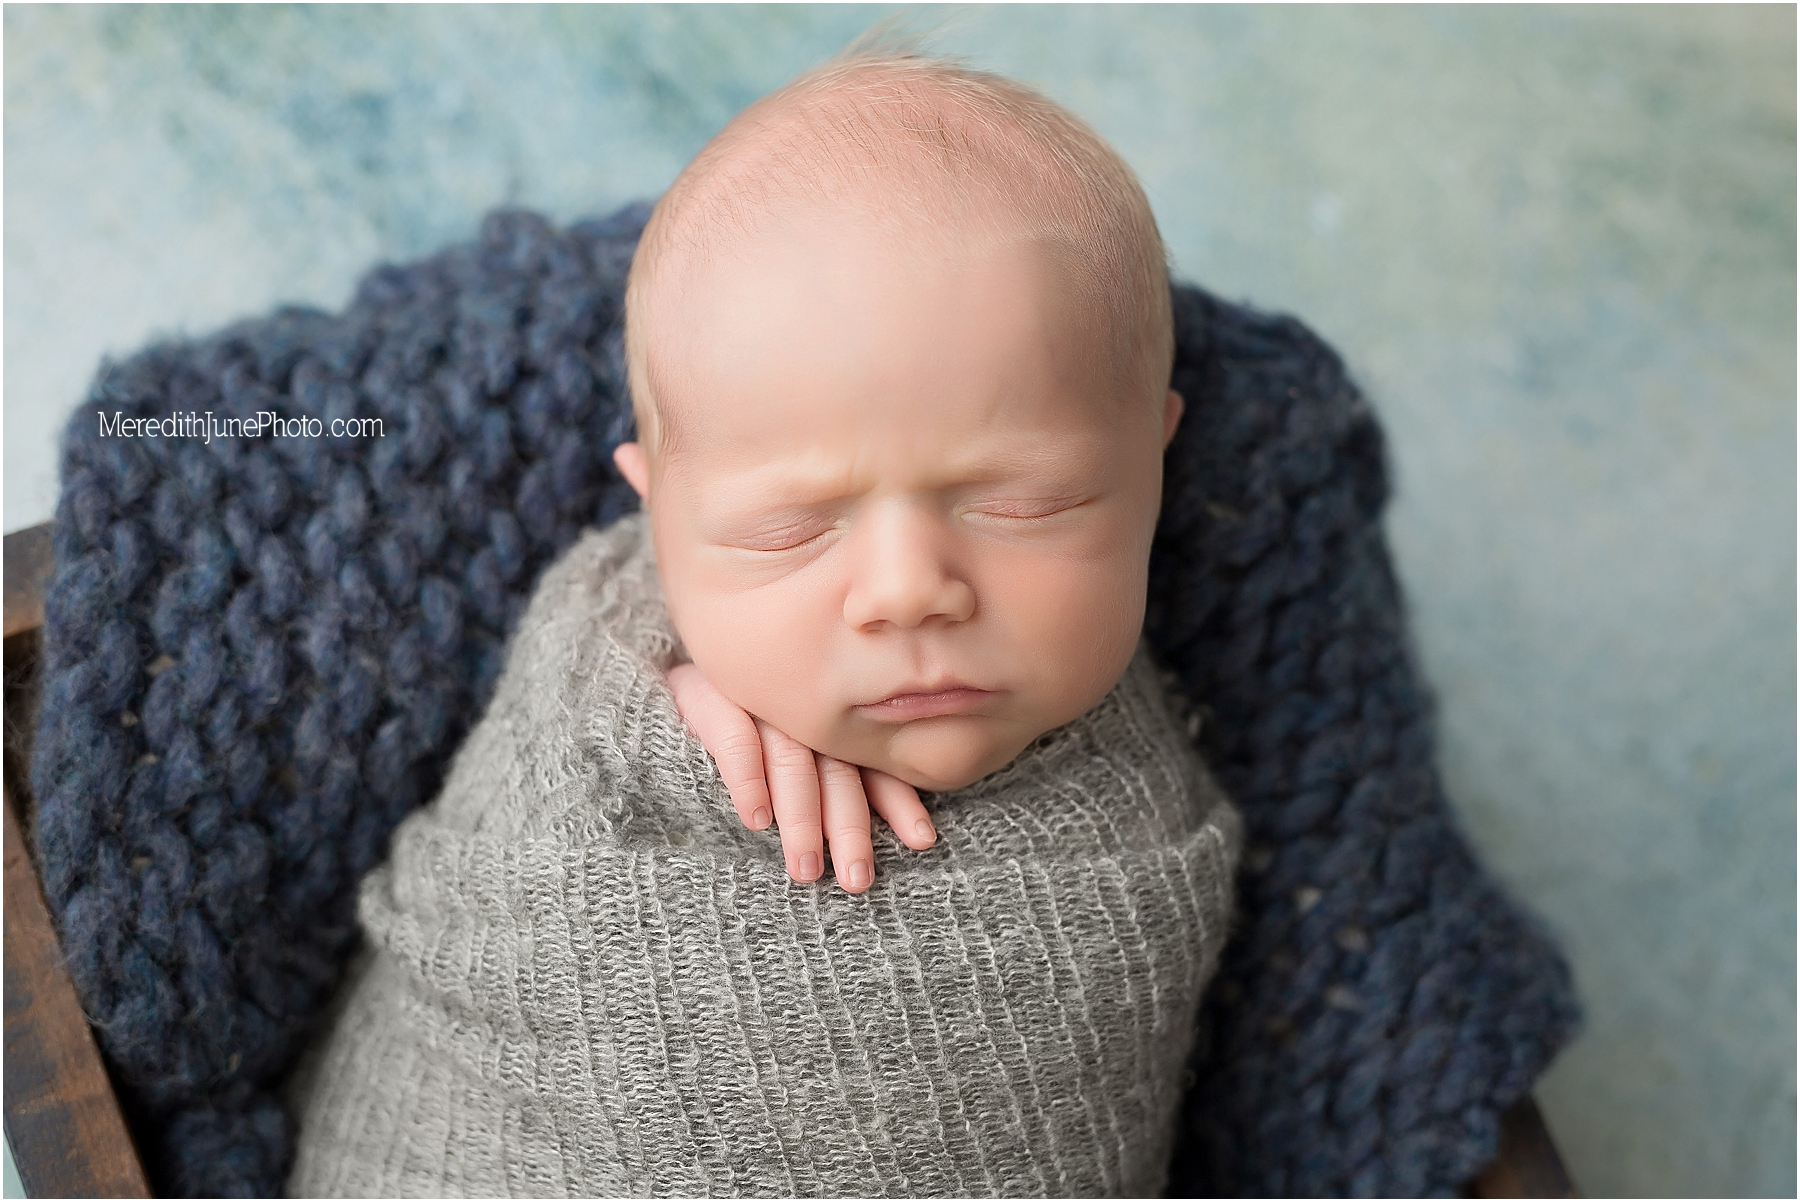 Newborn baby boy photo session at Meredith June Photography